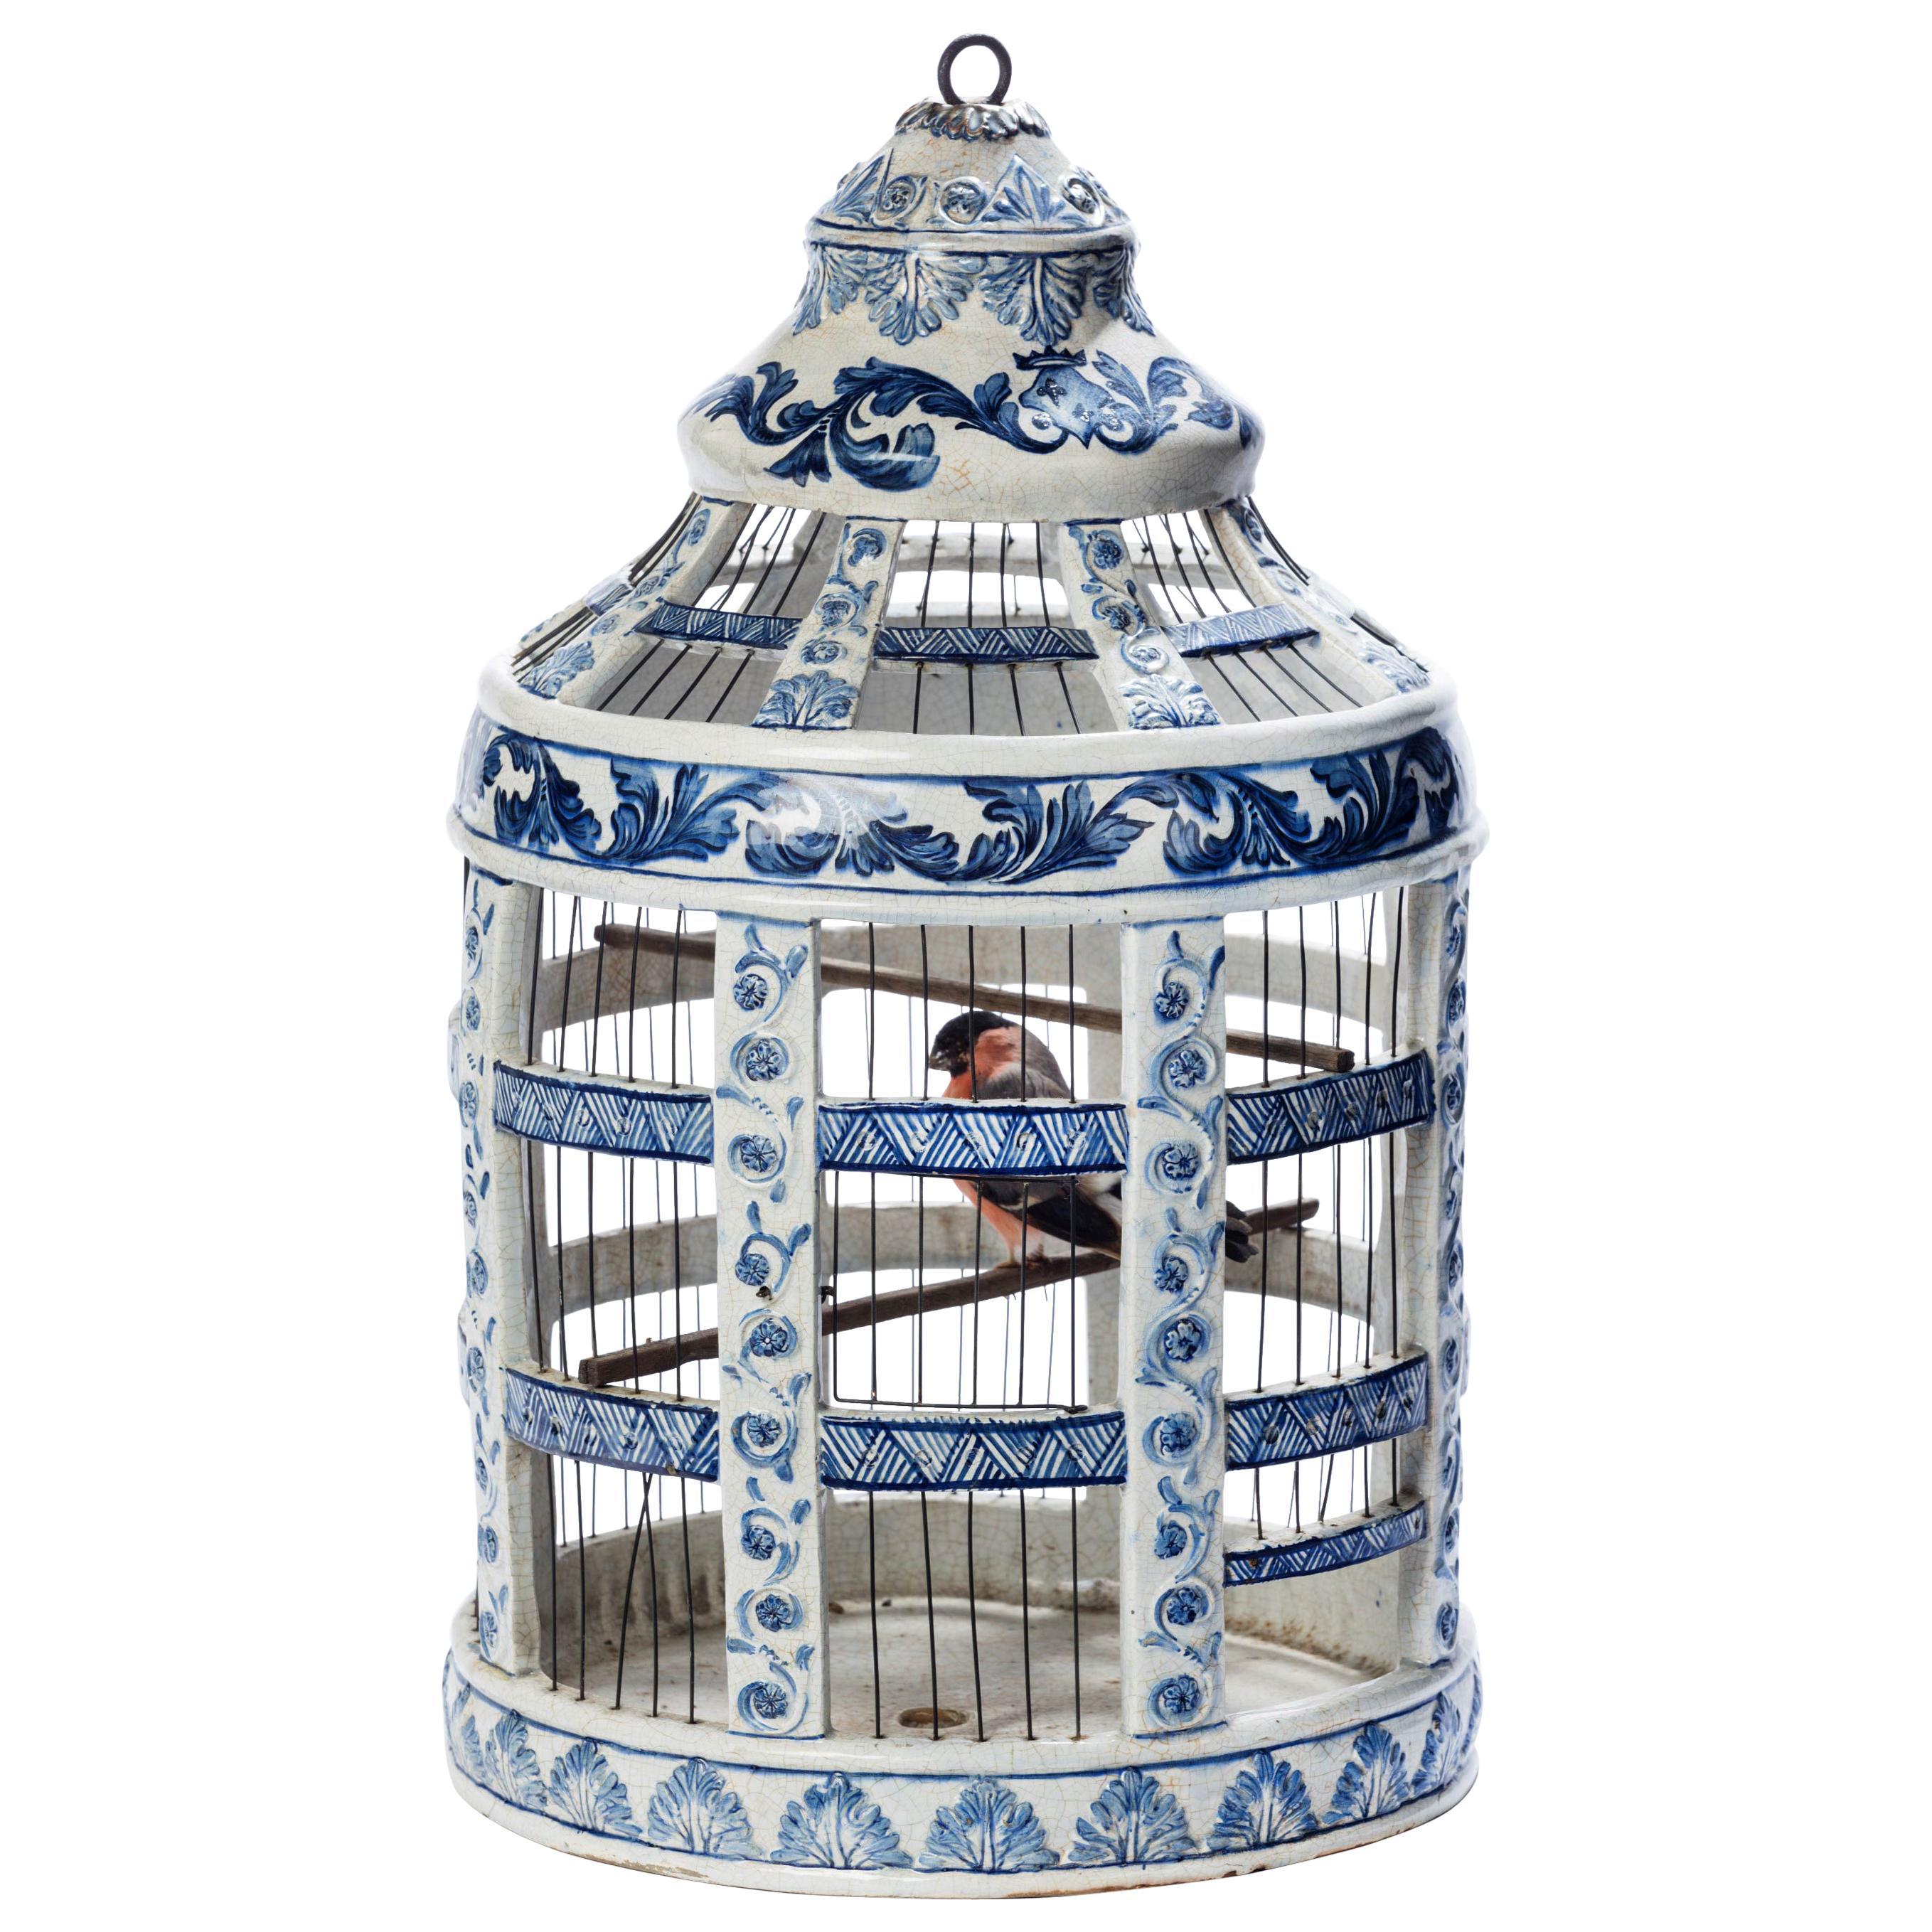 Extremely Rare 18th Century Dutch, Delft, Blue and White Birdcage